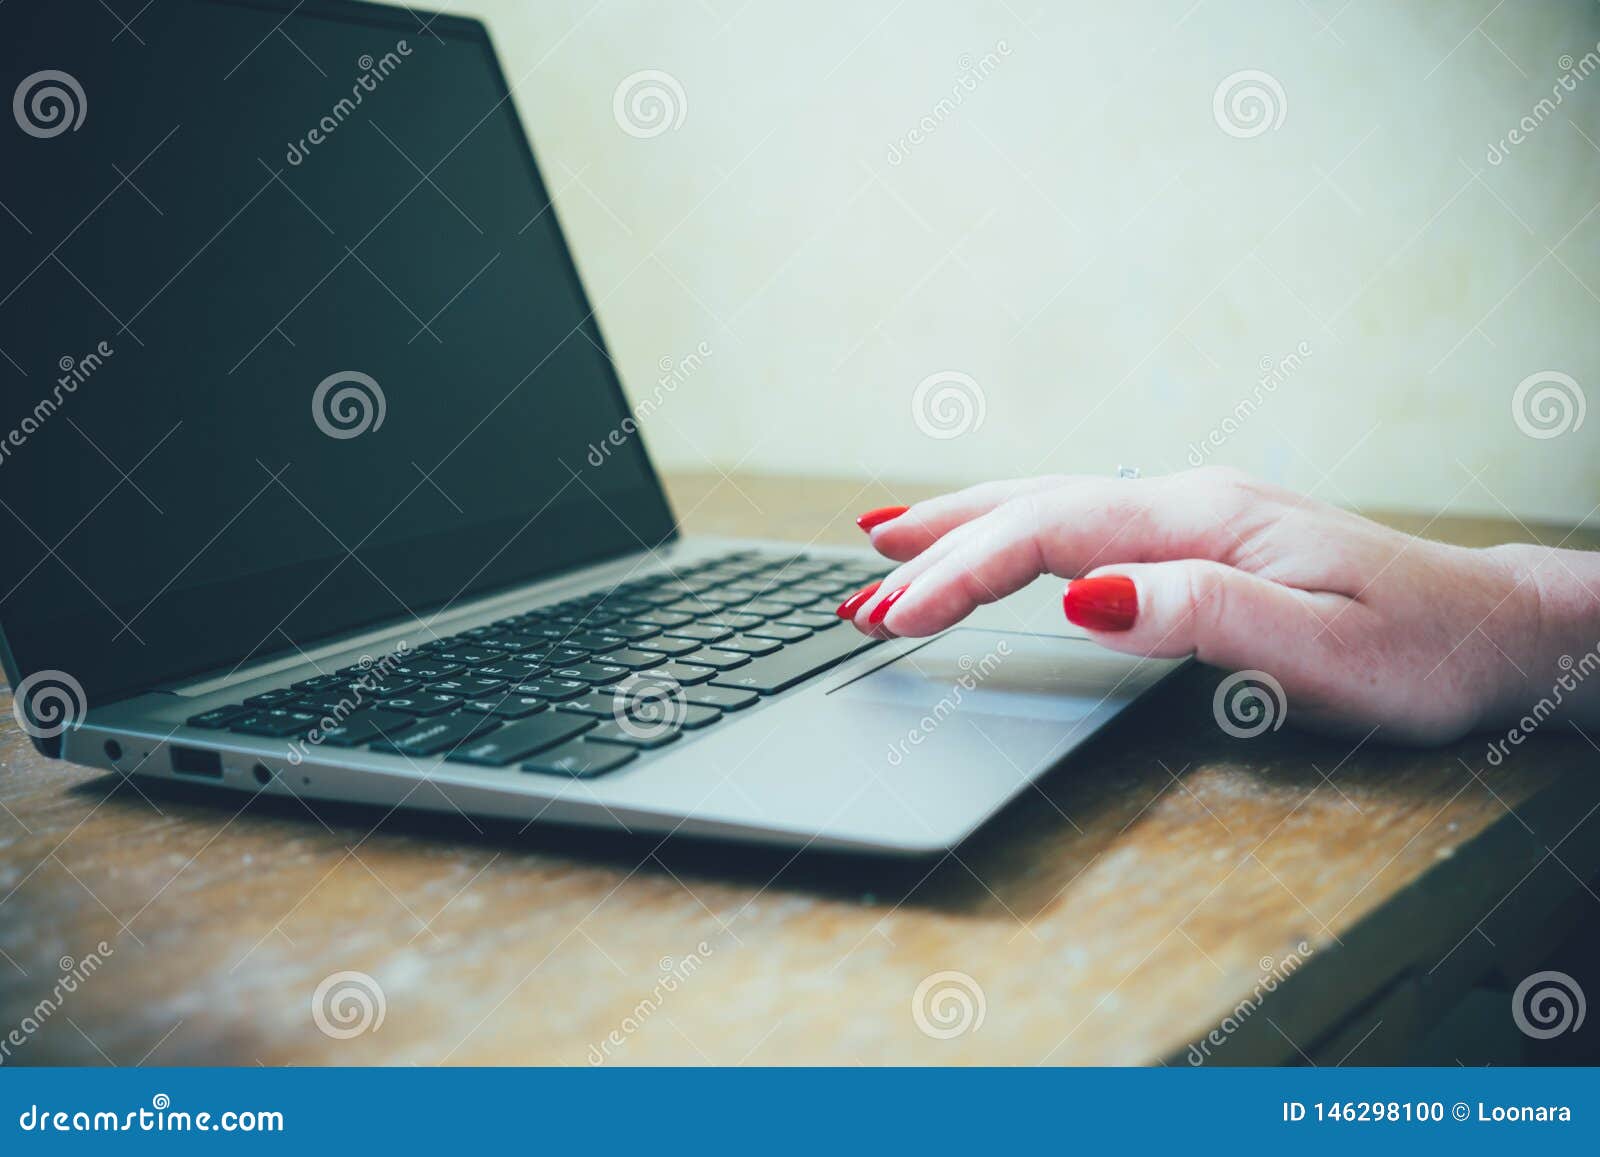 Womans Hand With Red Nails On Laptop Keyboard Lady Using Laptop